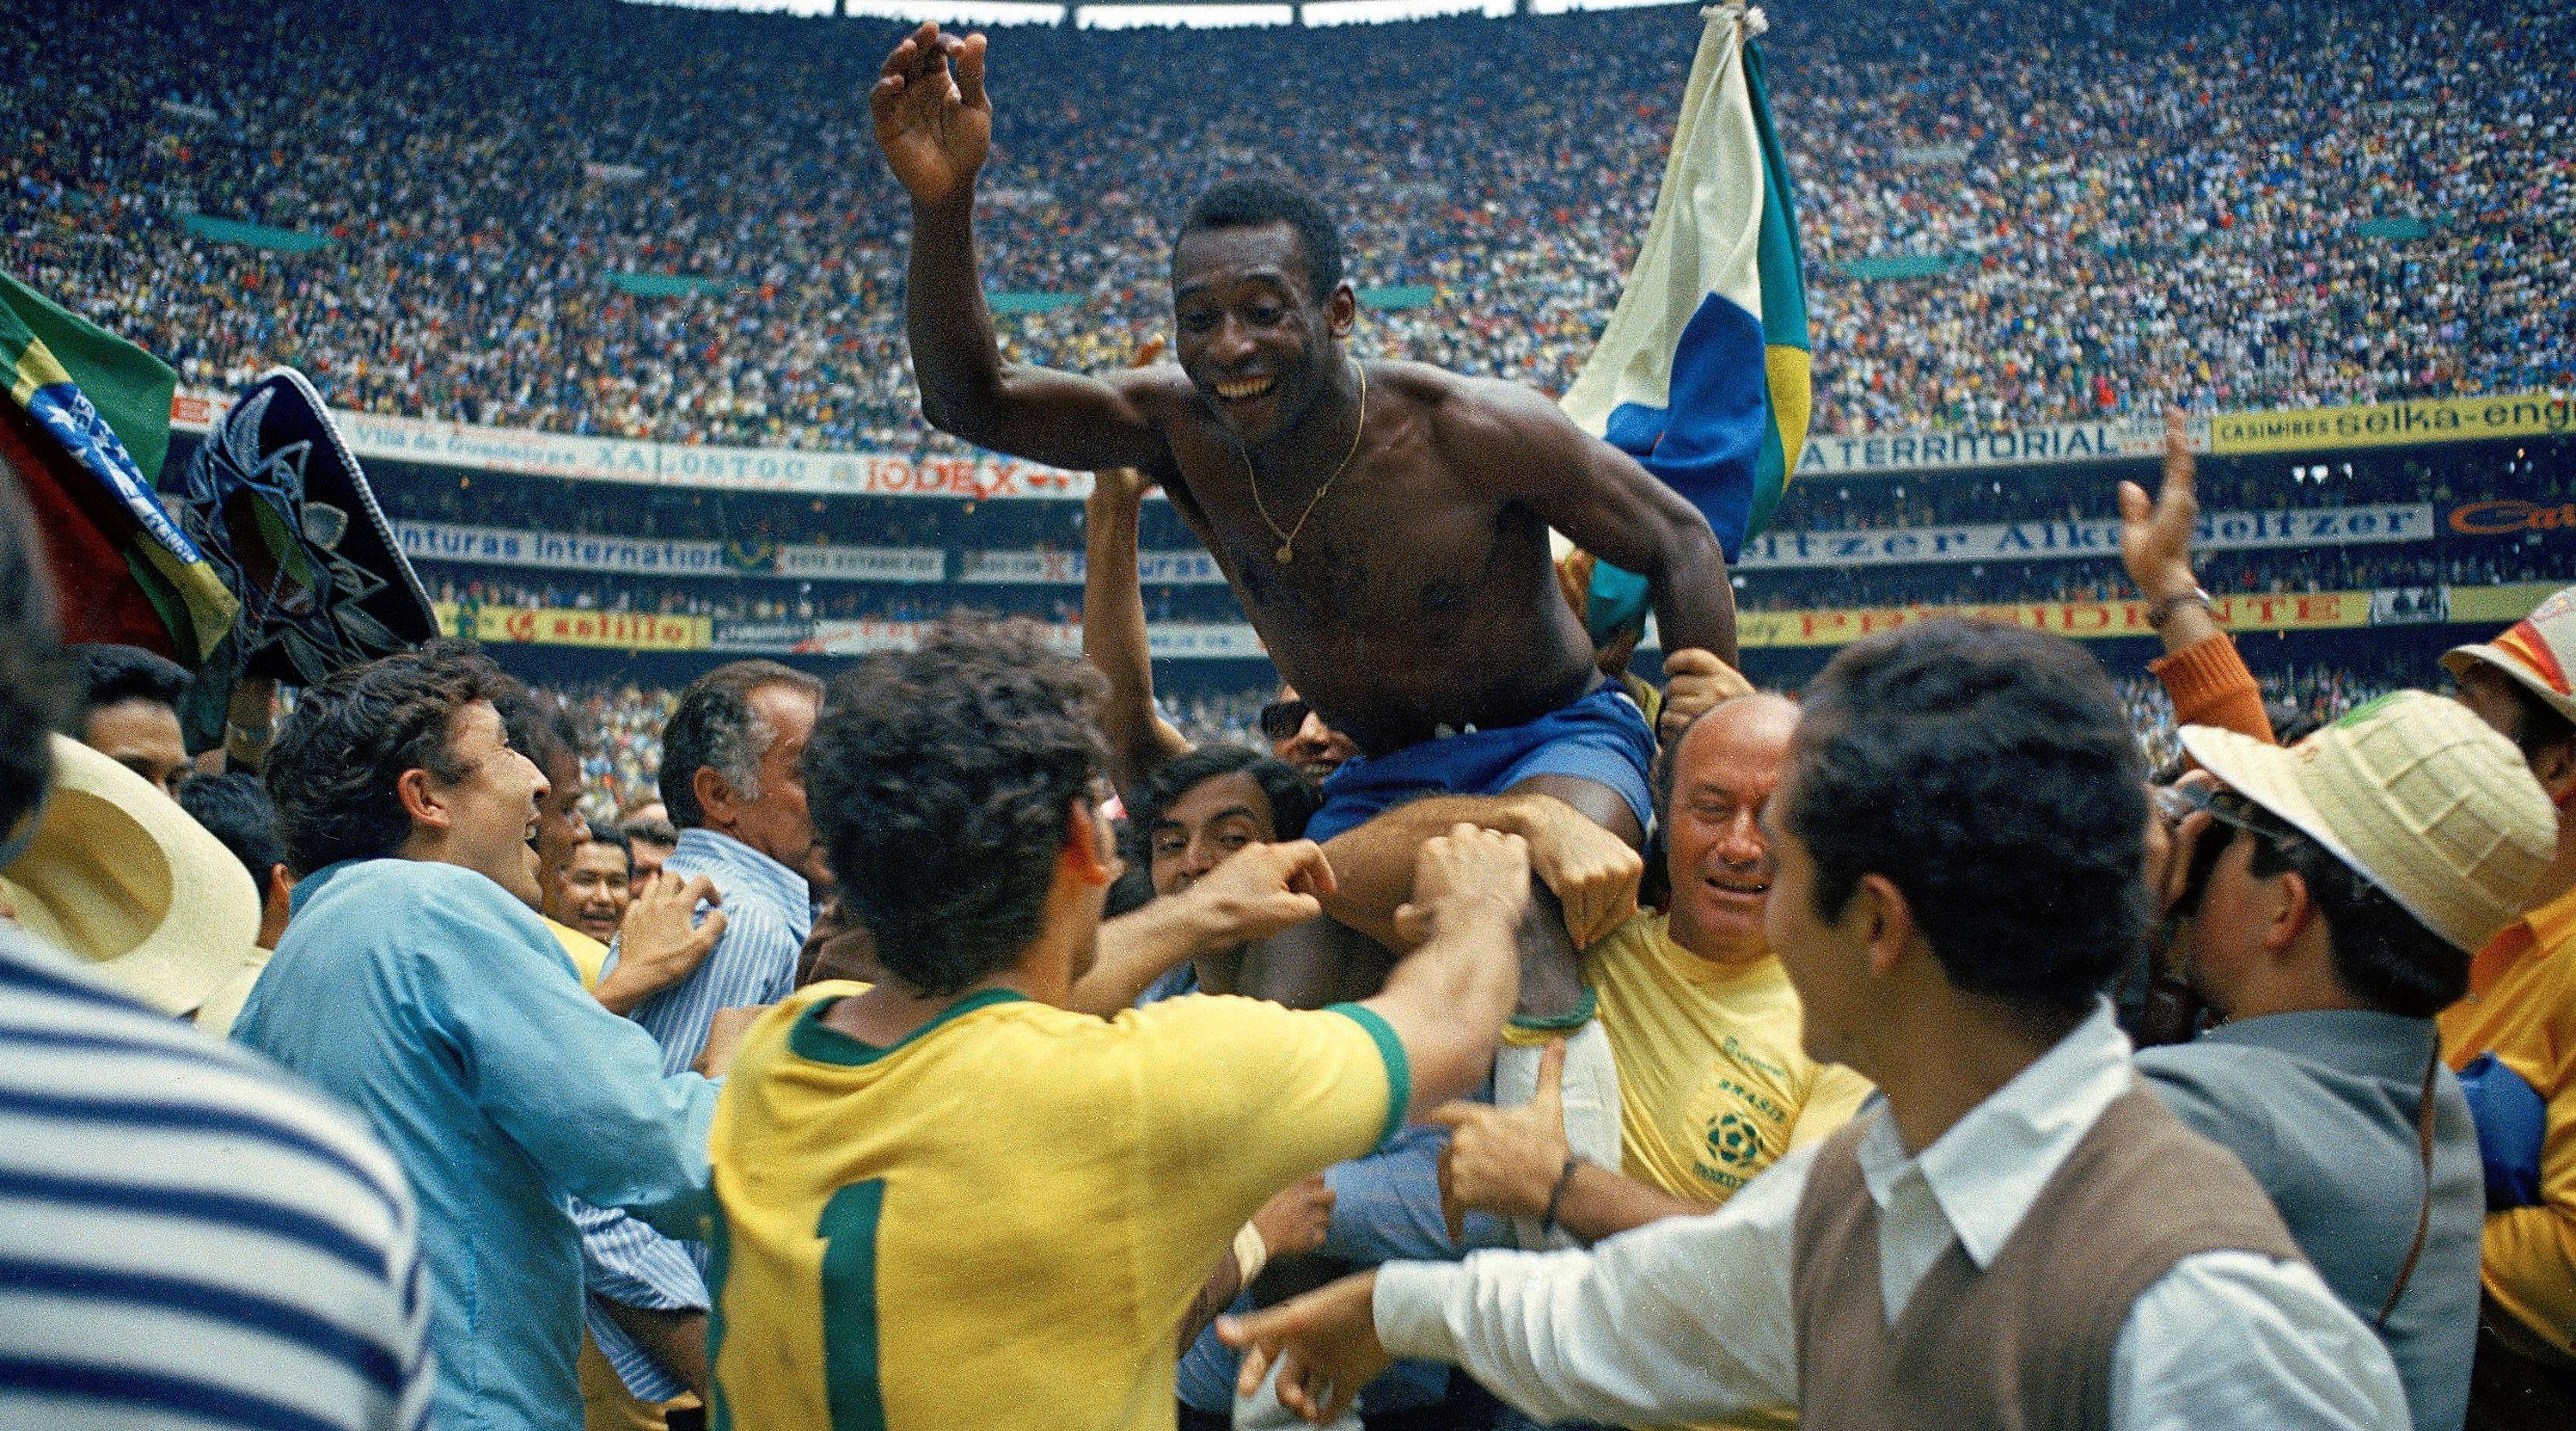 Pele of Brazil celebrates the victory after winning the 1970 World Cup in Mexico match between Brazil and Italy at Estadio Azteca on 21 June in Città del Messico. Mexico (Photo by Alessandro Sabattini/Getty Images)